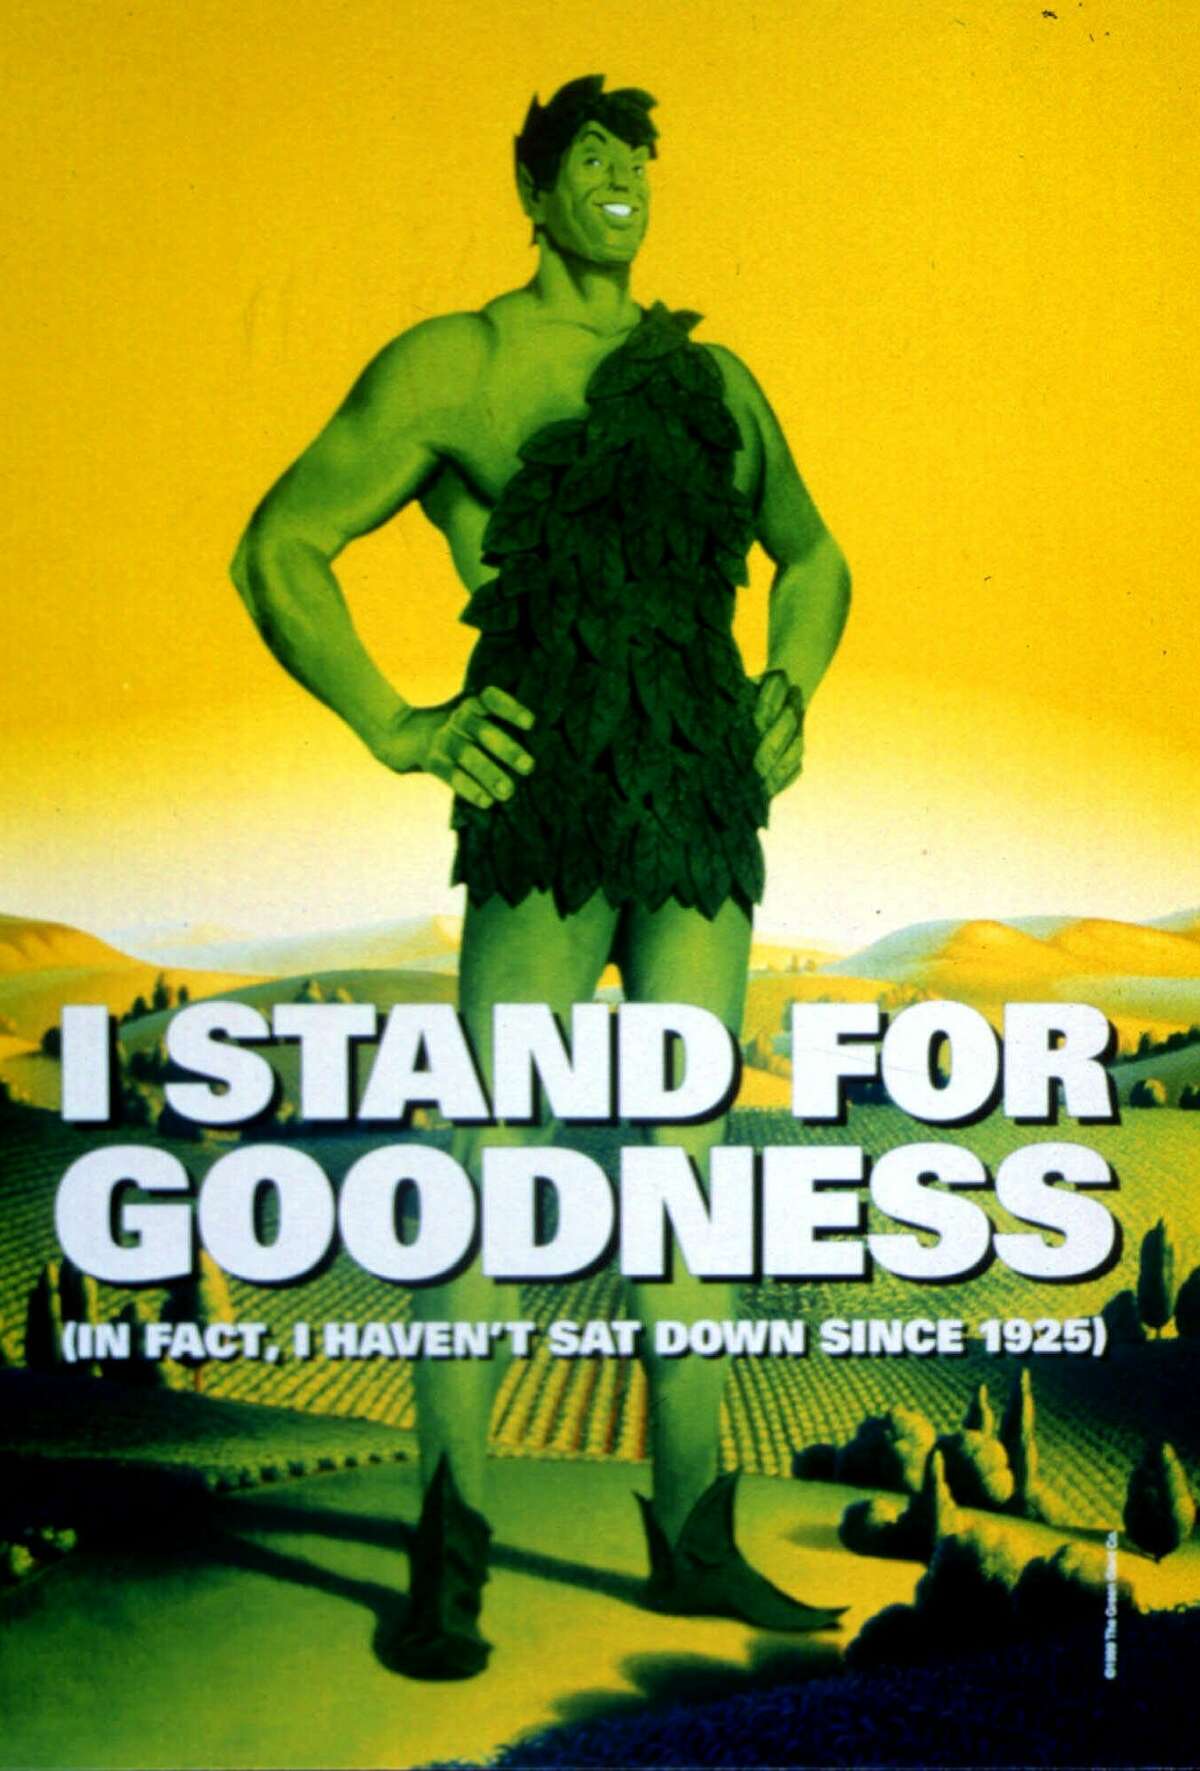 Jolly Green Giant enlisted to urge kale crowd to eat frozen food